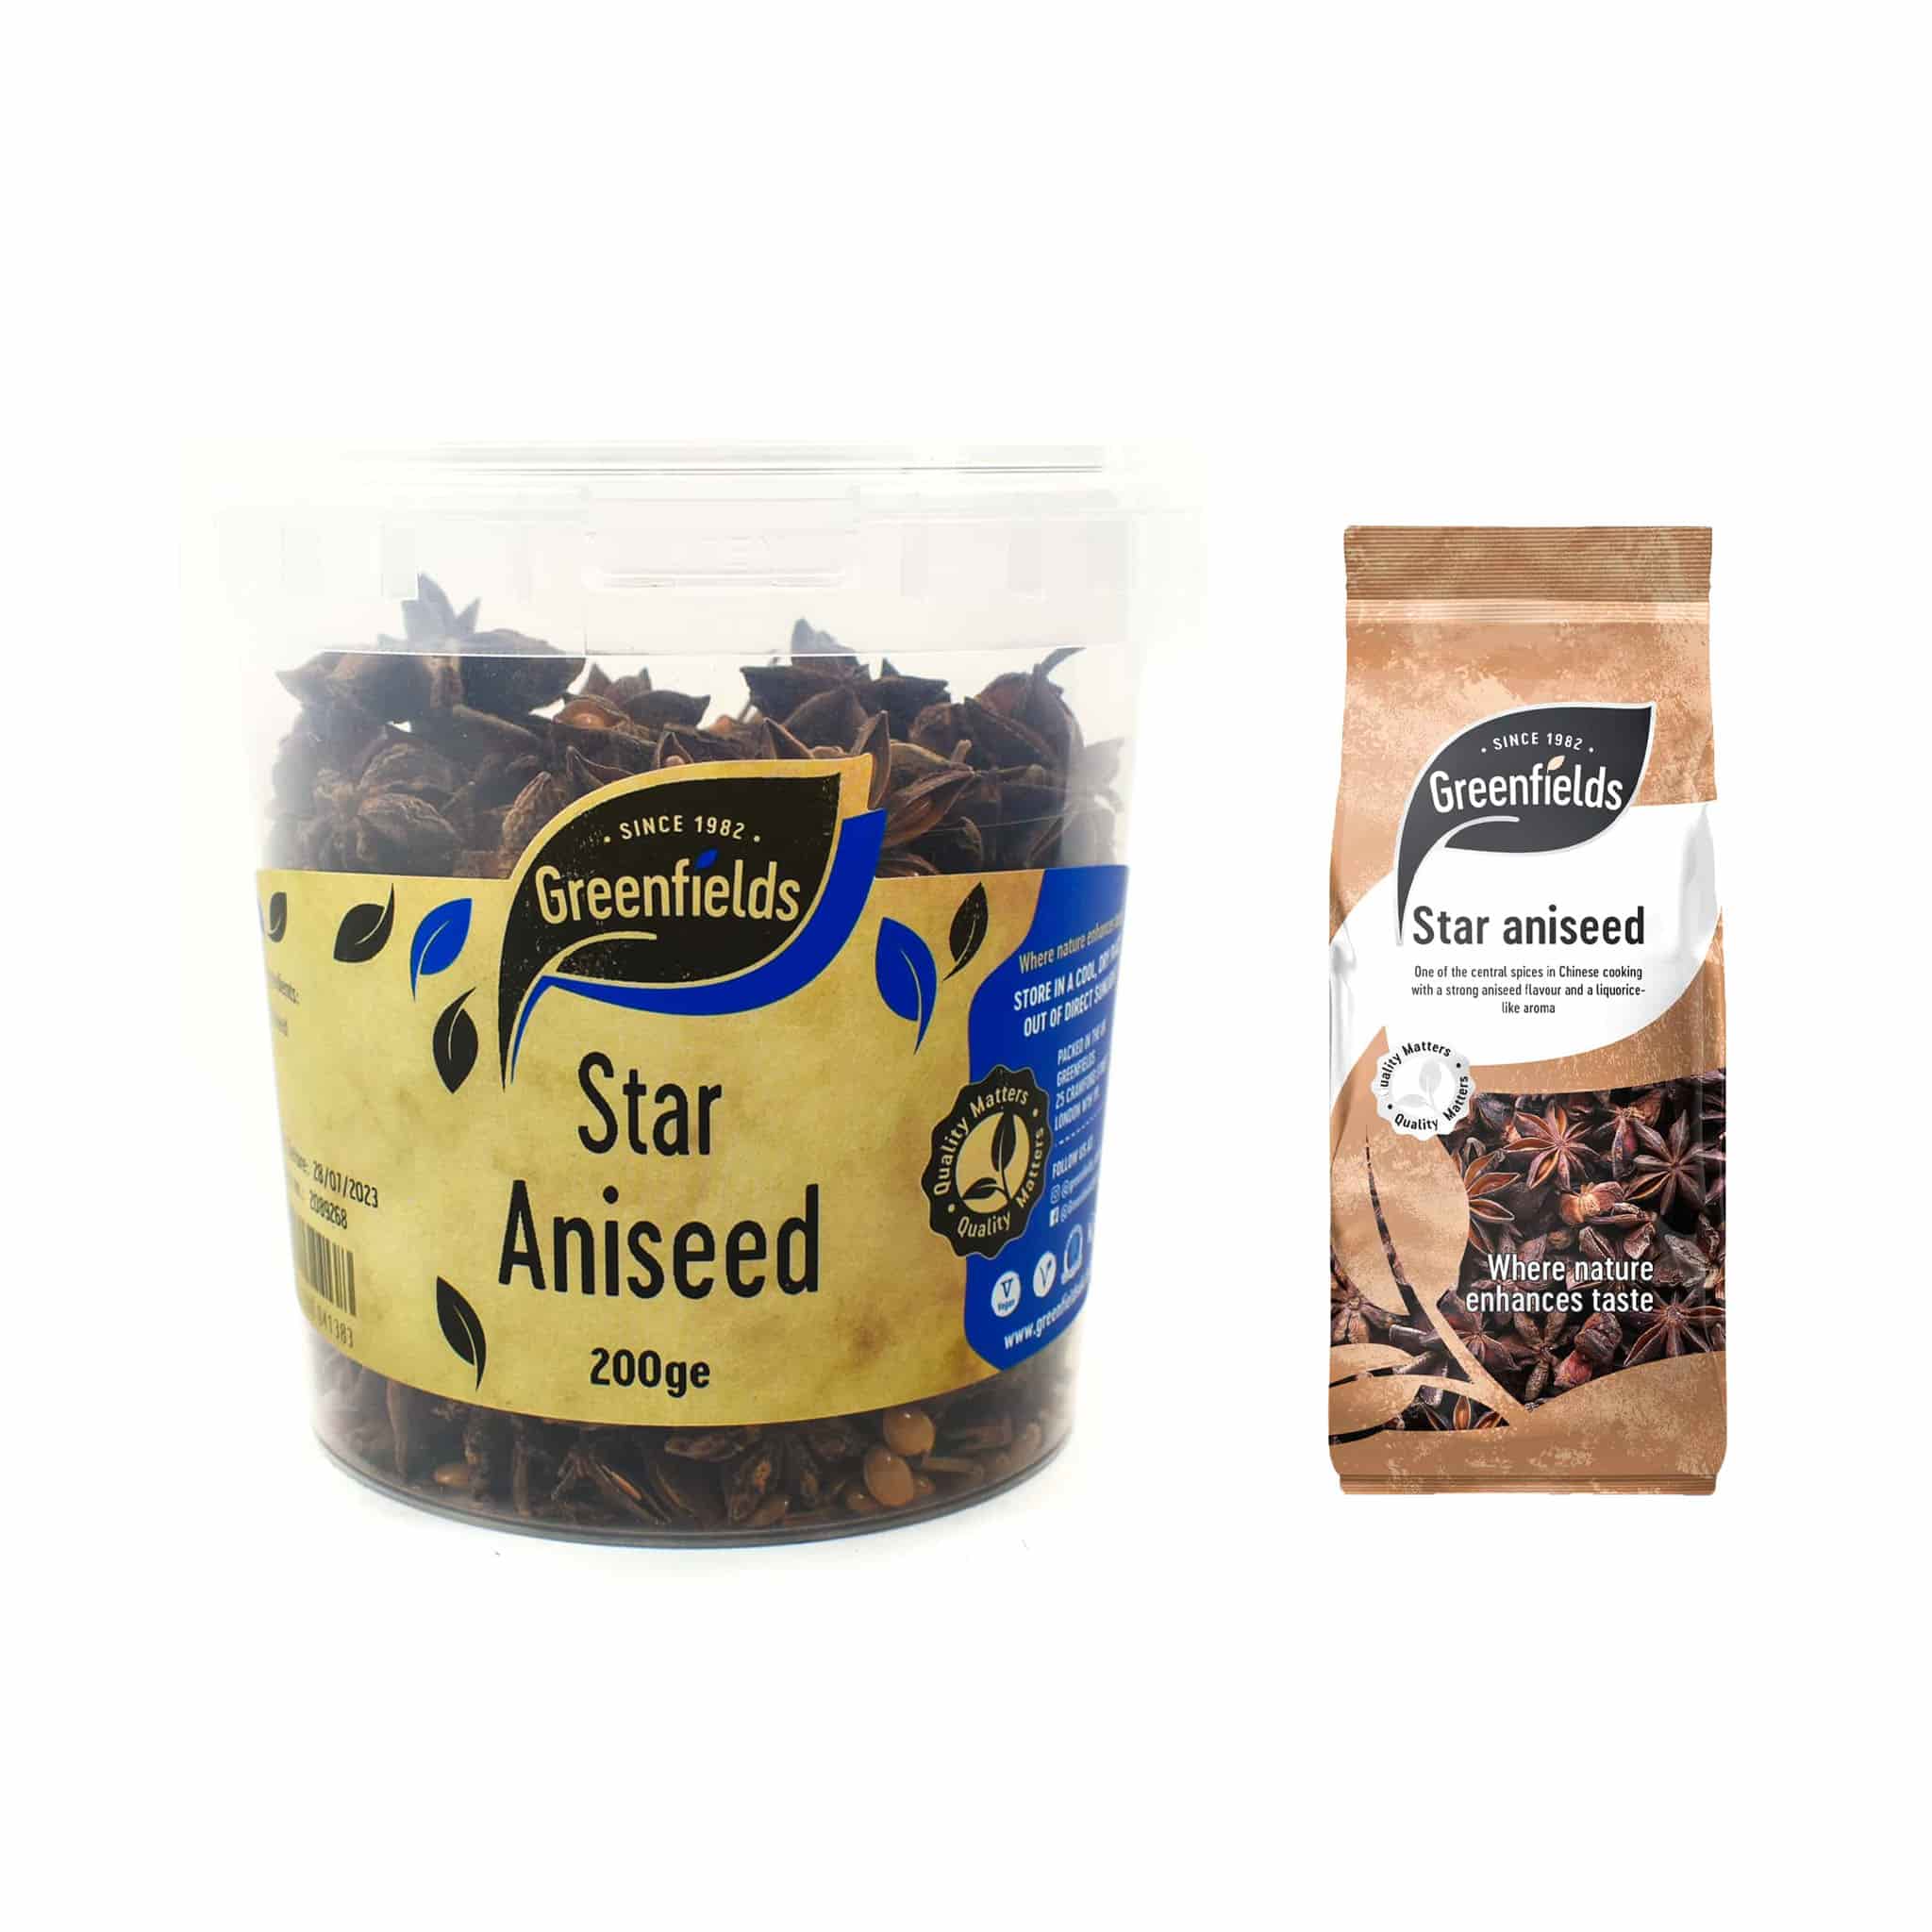 Greenfields Whole Star Aniseed